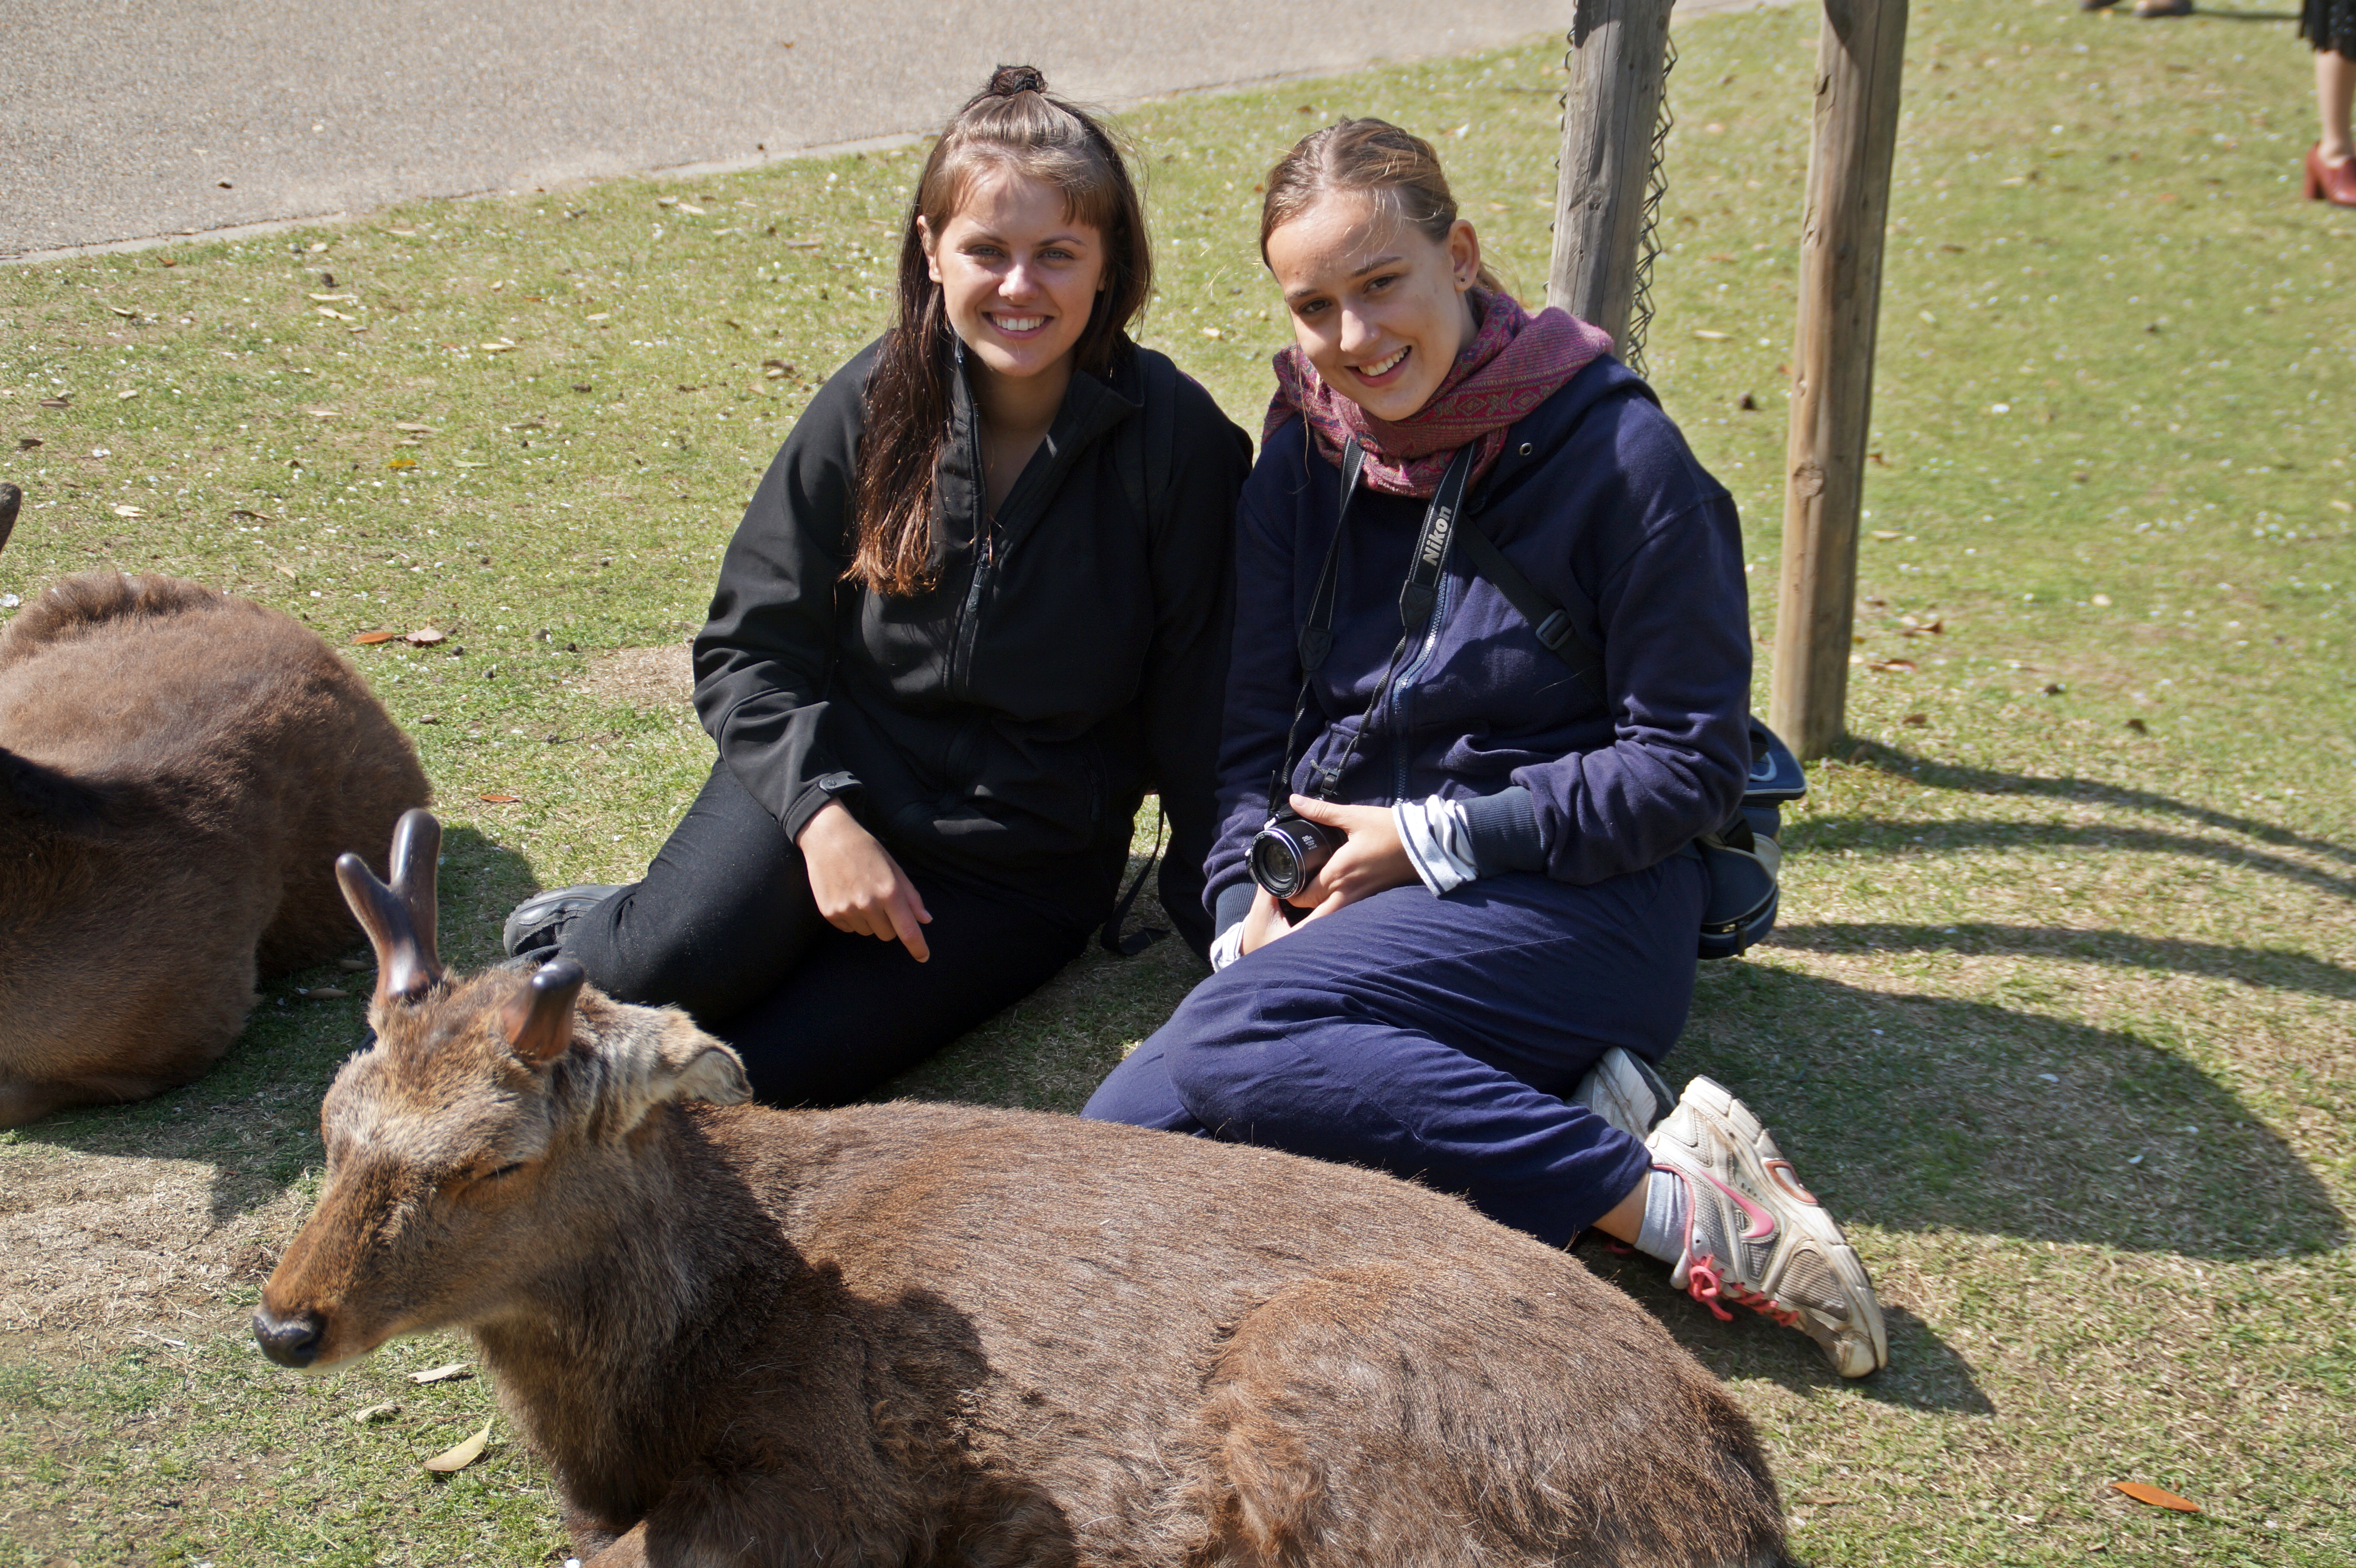 With my friend Victoria in Nara Park